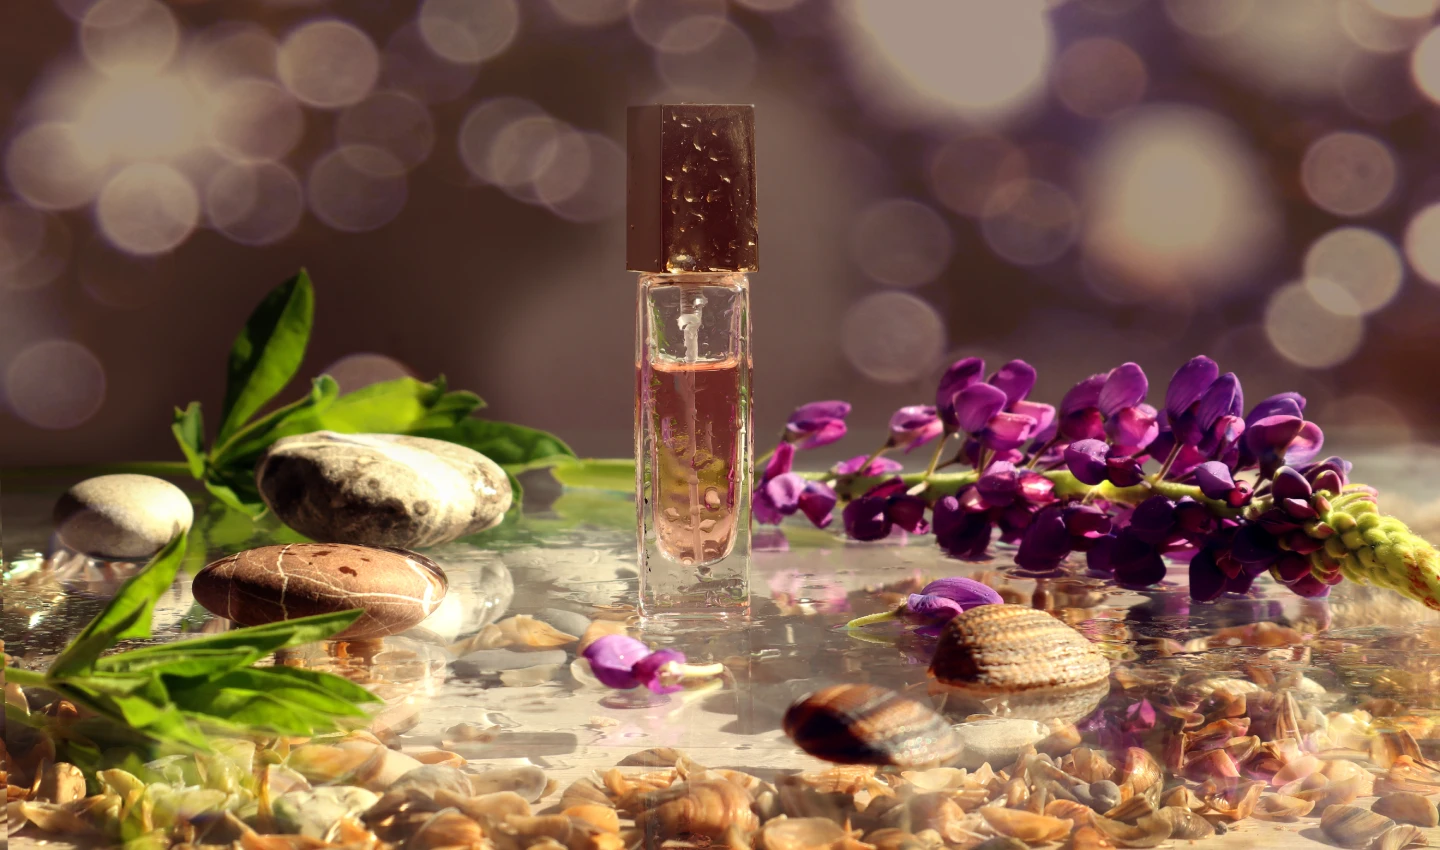 A bottle of perfume set against a natural landscape, symbolizing the use of natural perfume ingredients.